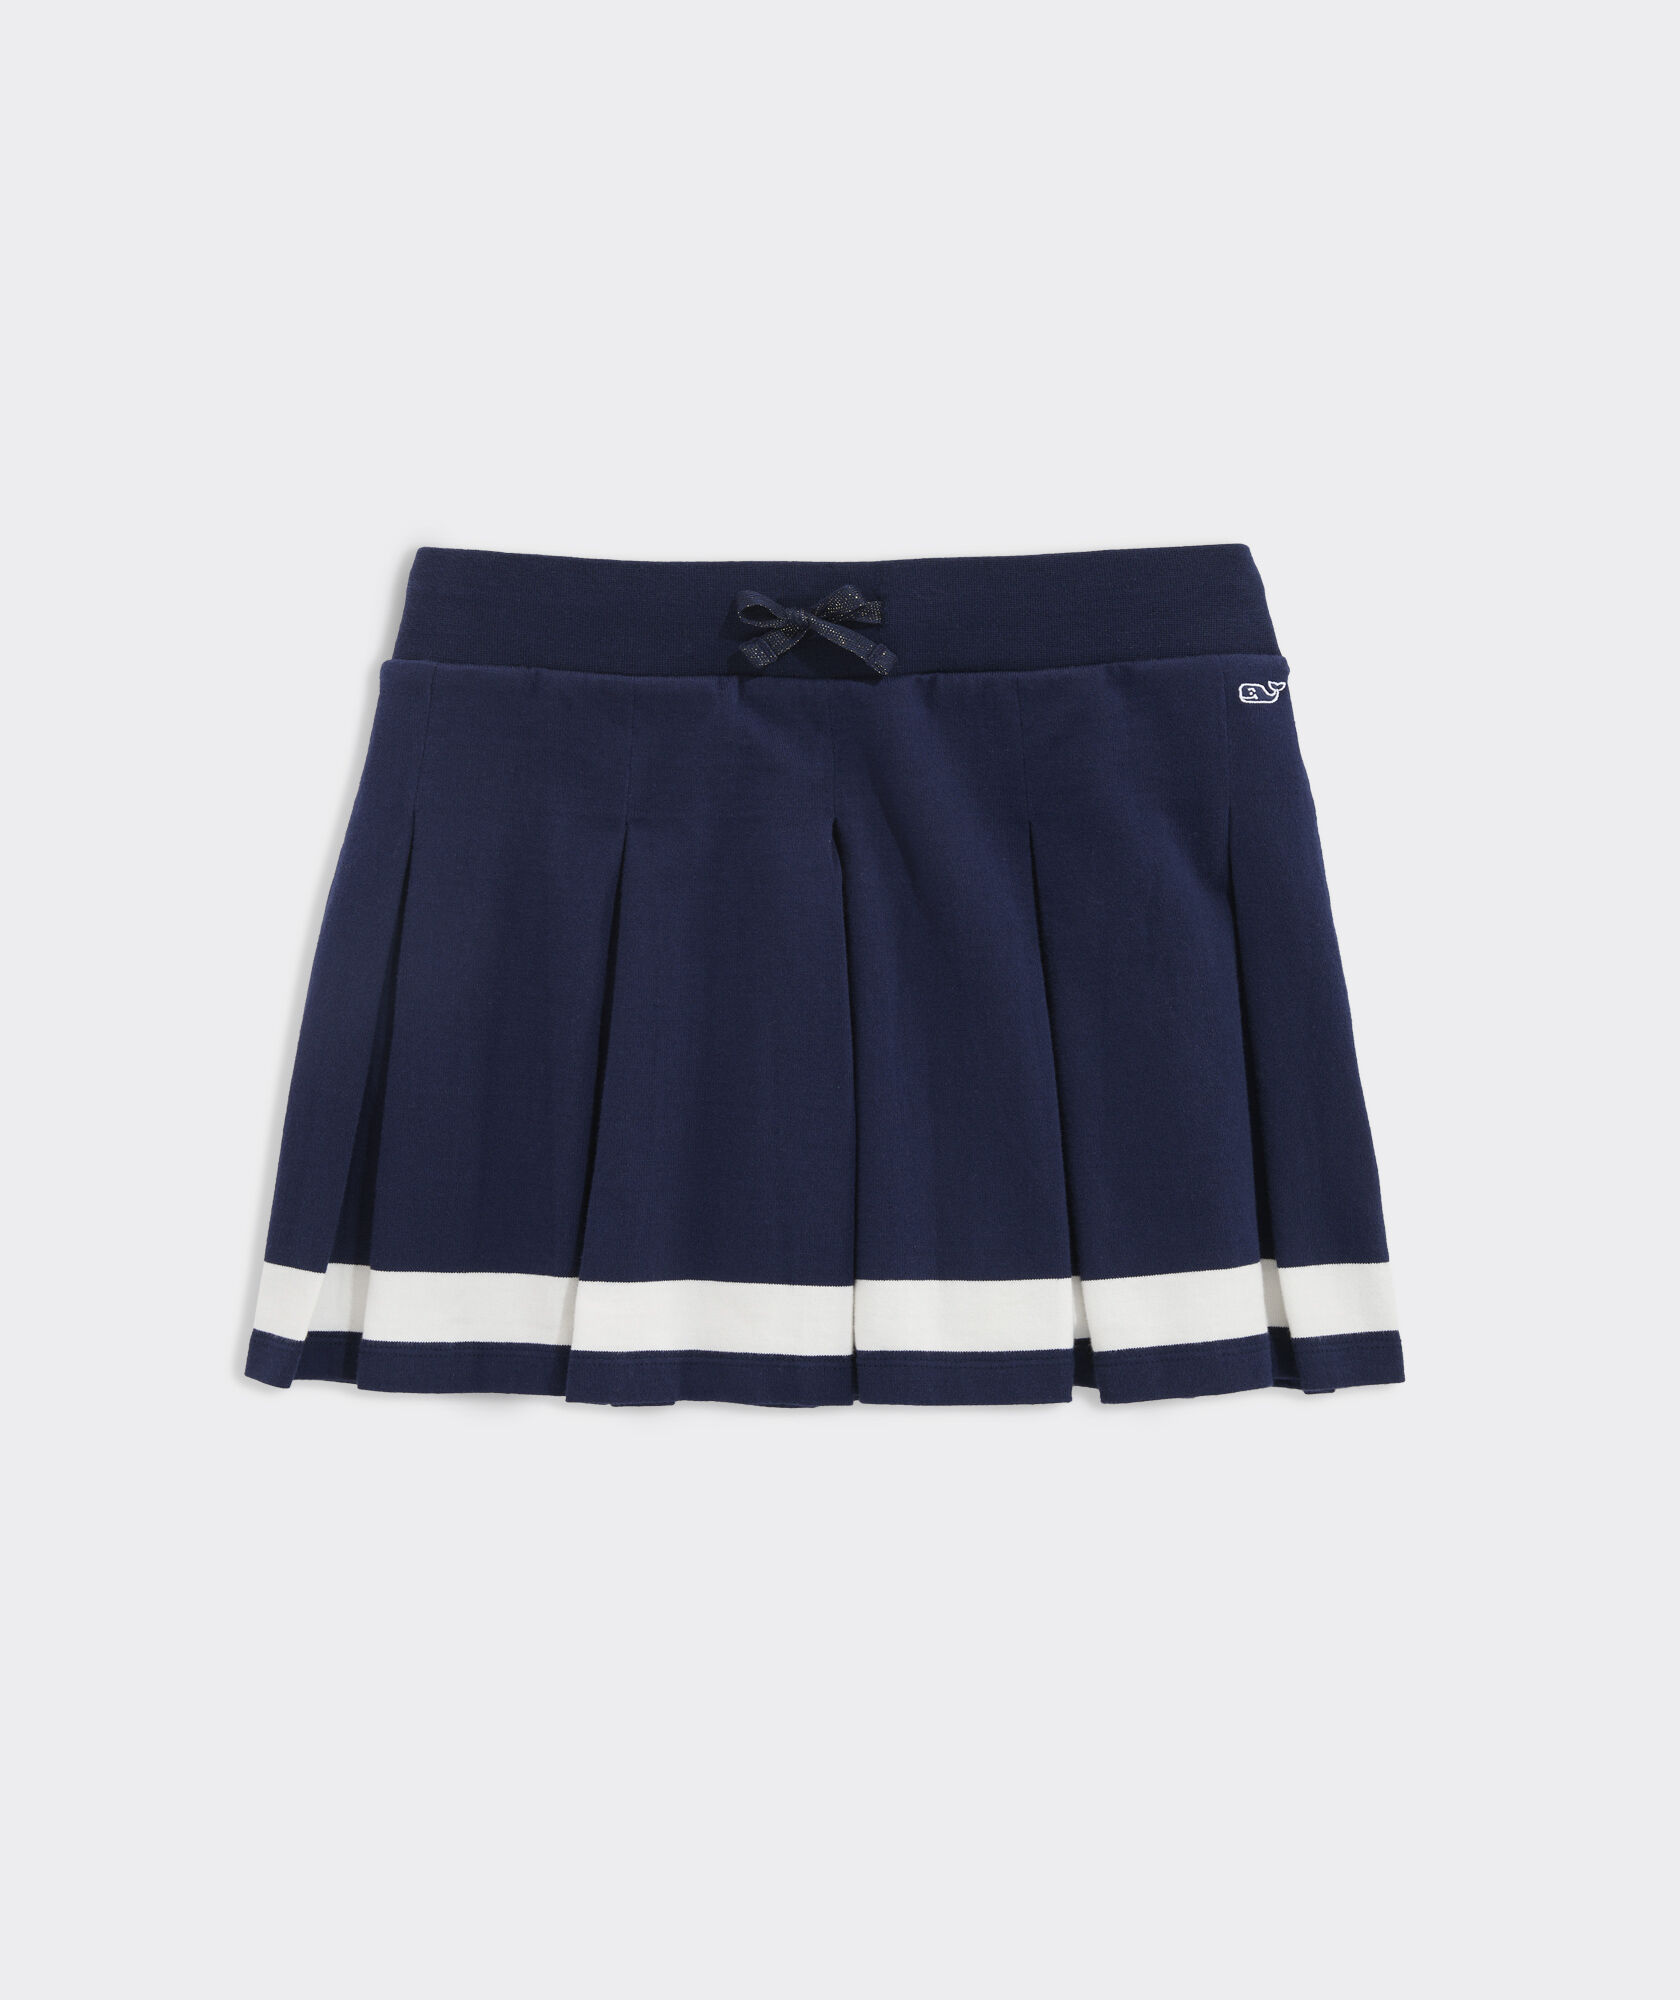 Girls' Pleated Rugby Skirt